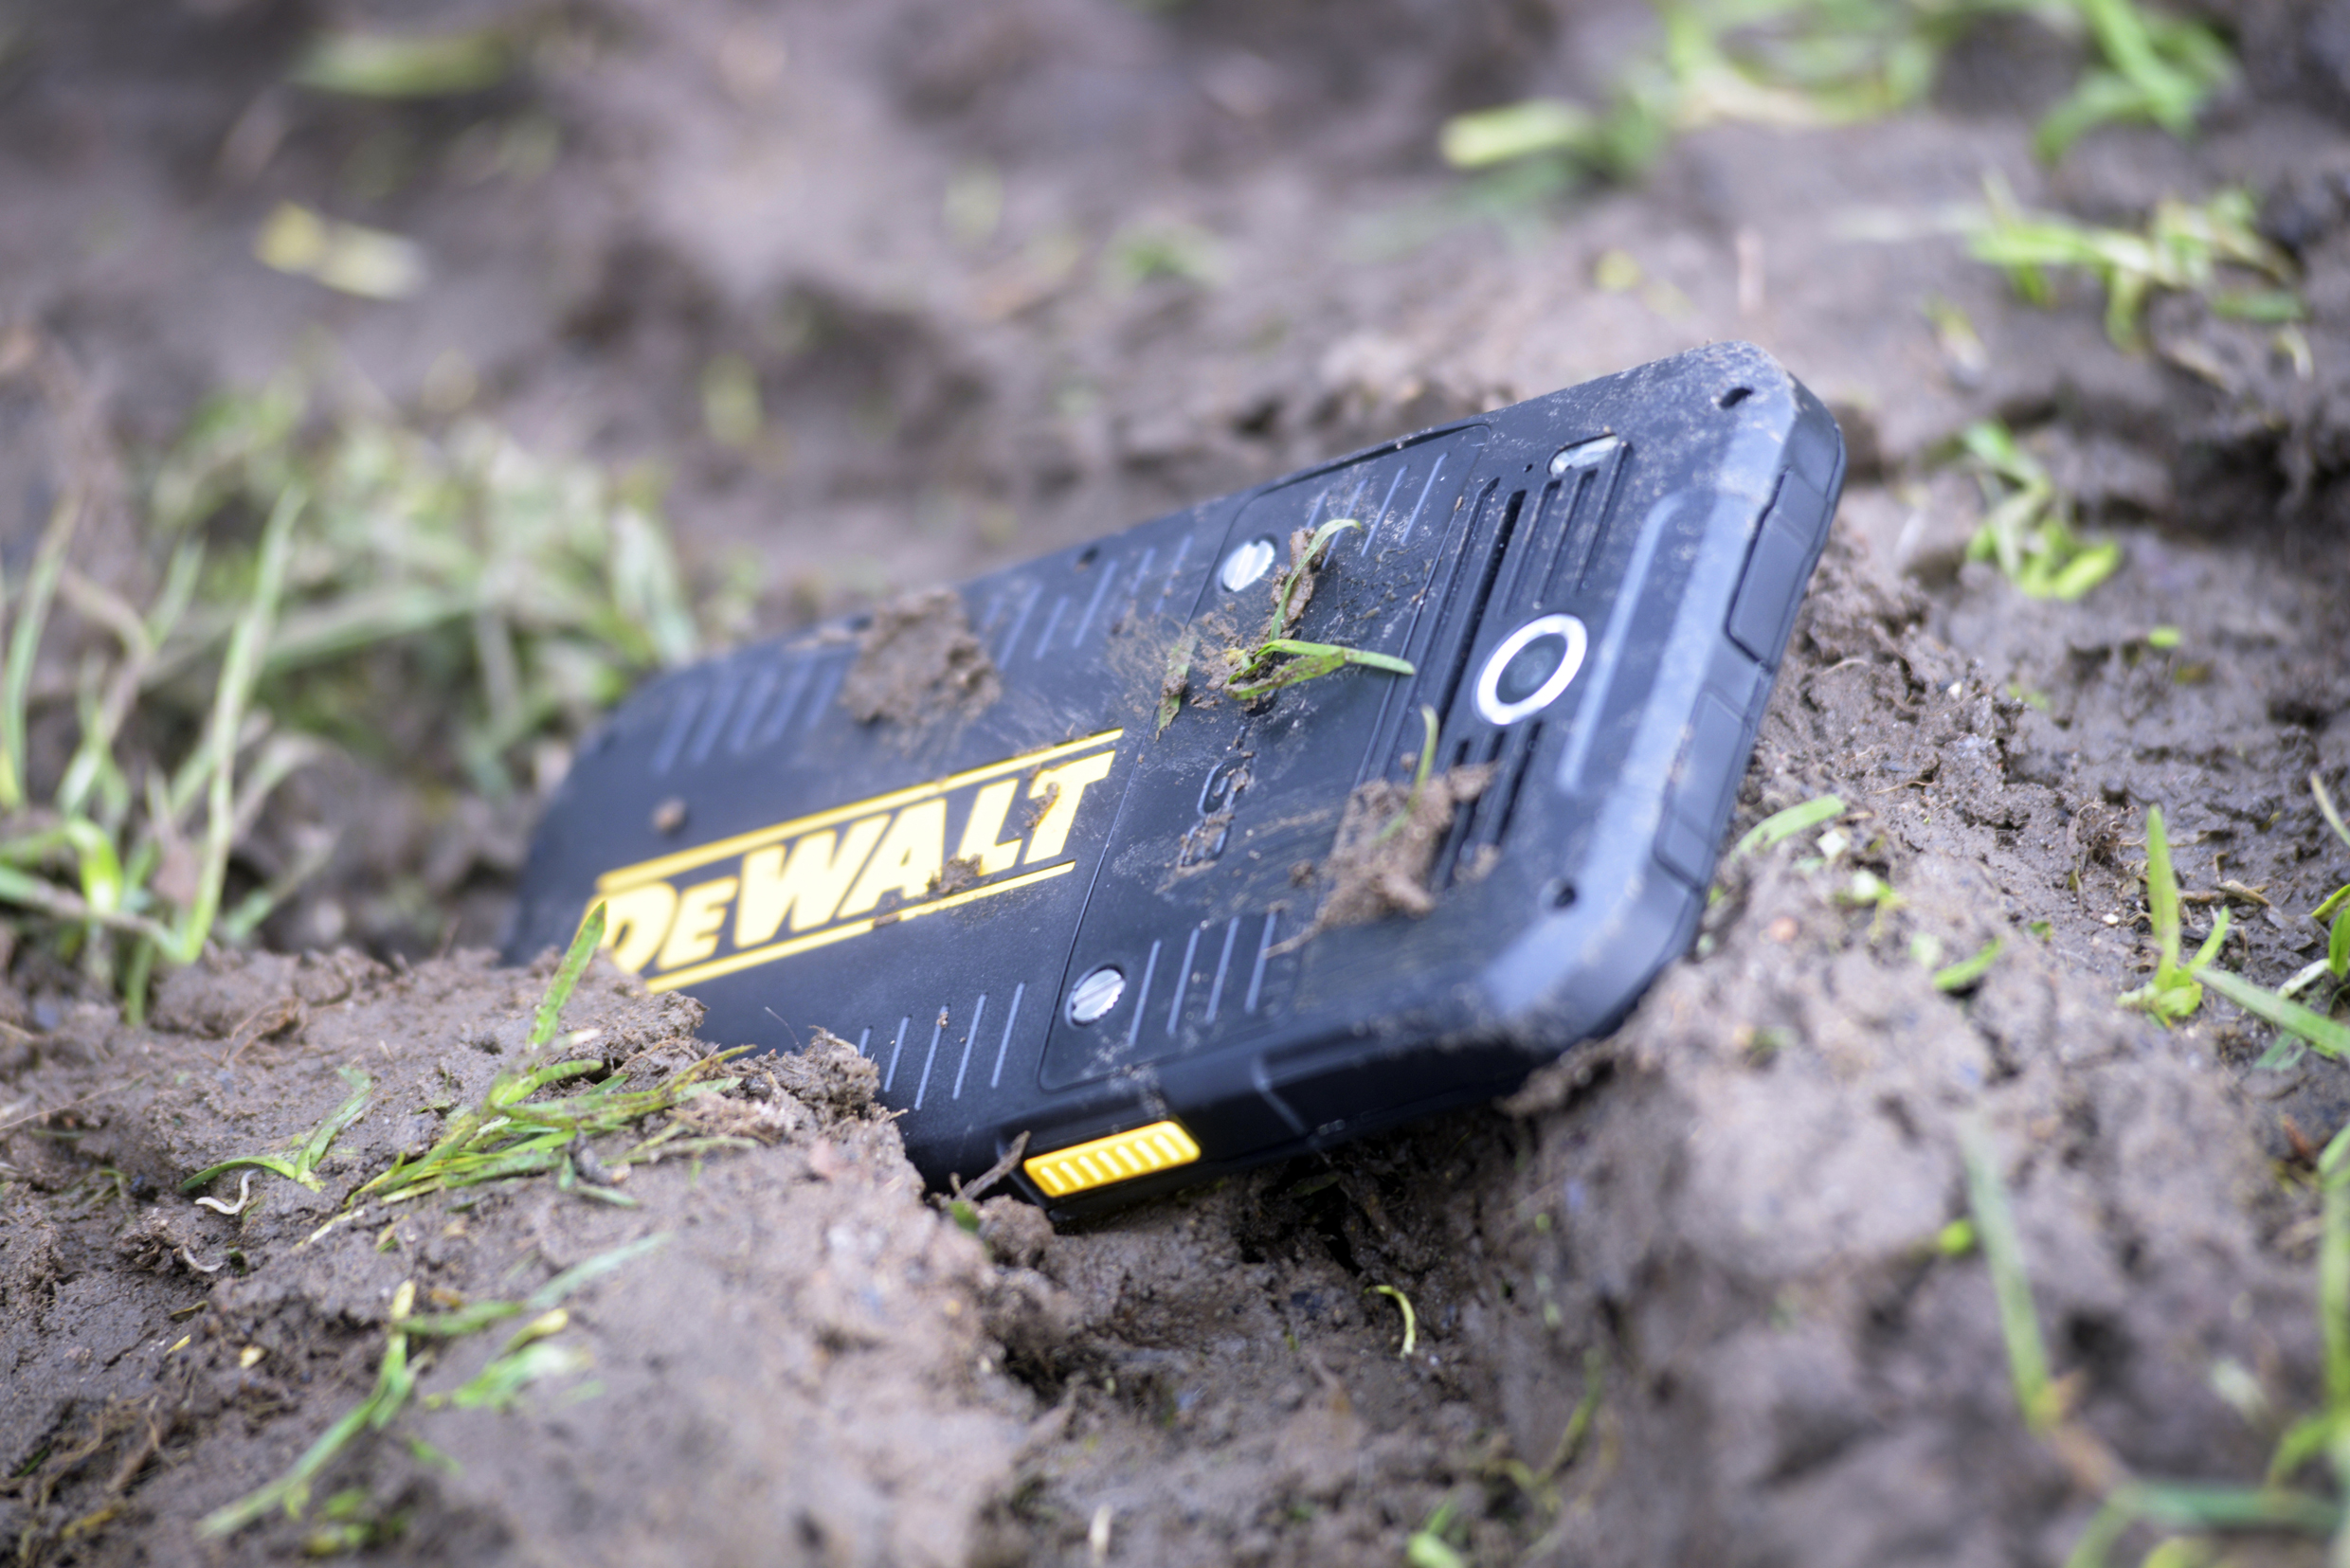 Dewalt MD501 – A Phone Designed for the Rugged Outdoors